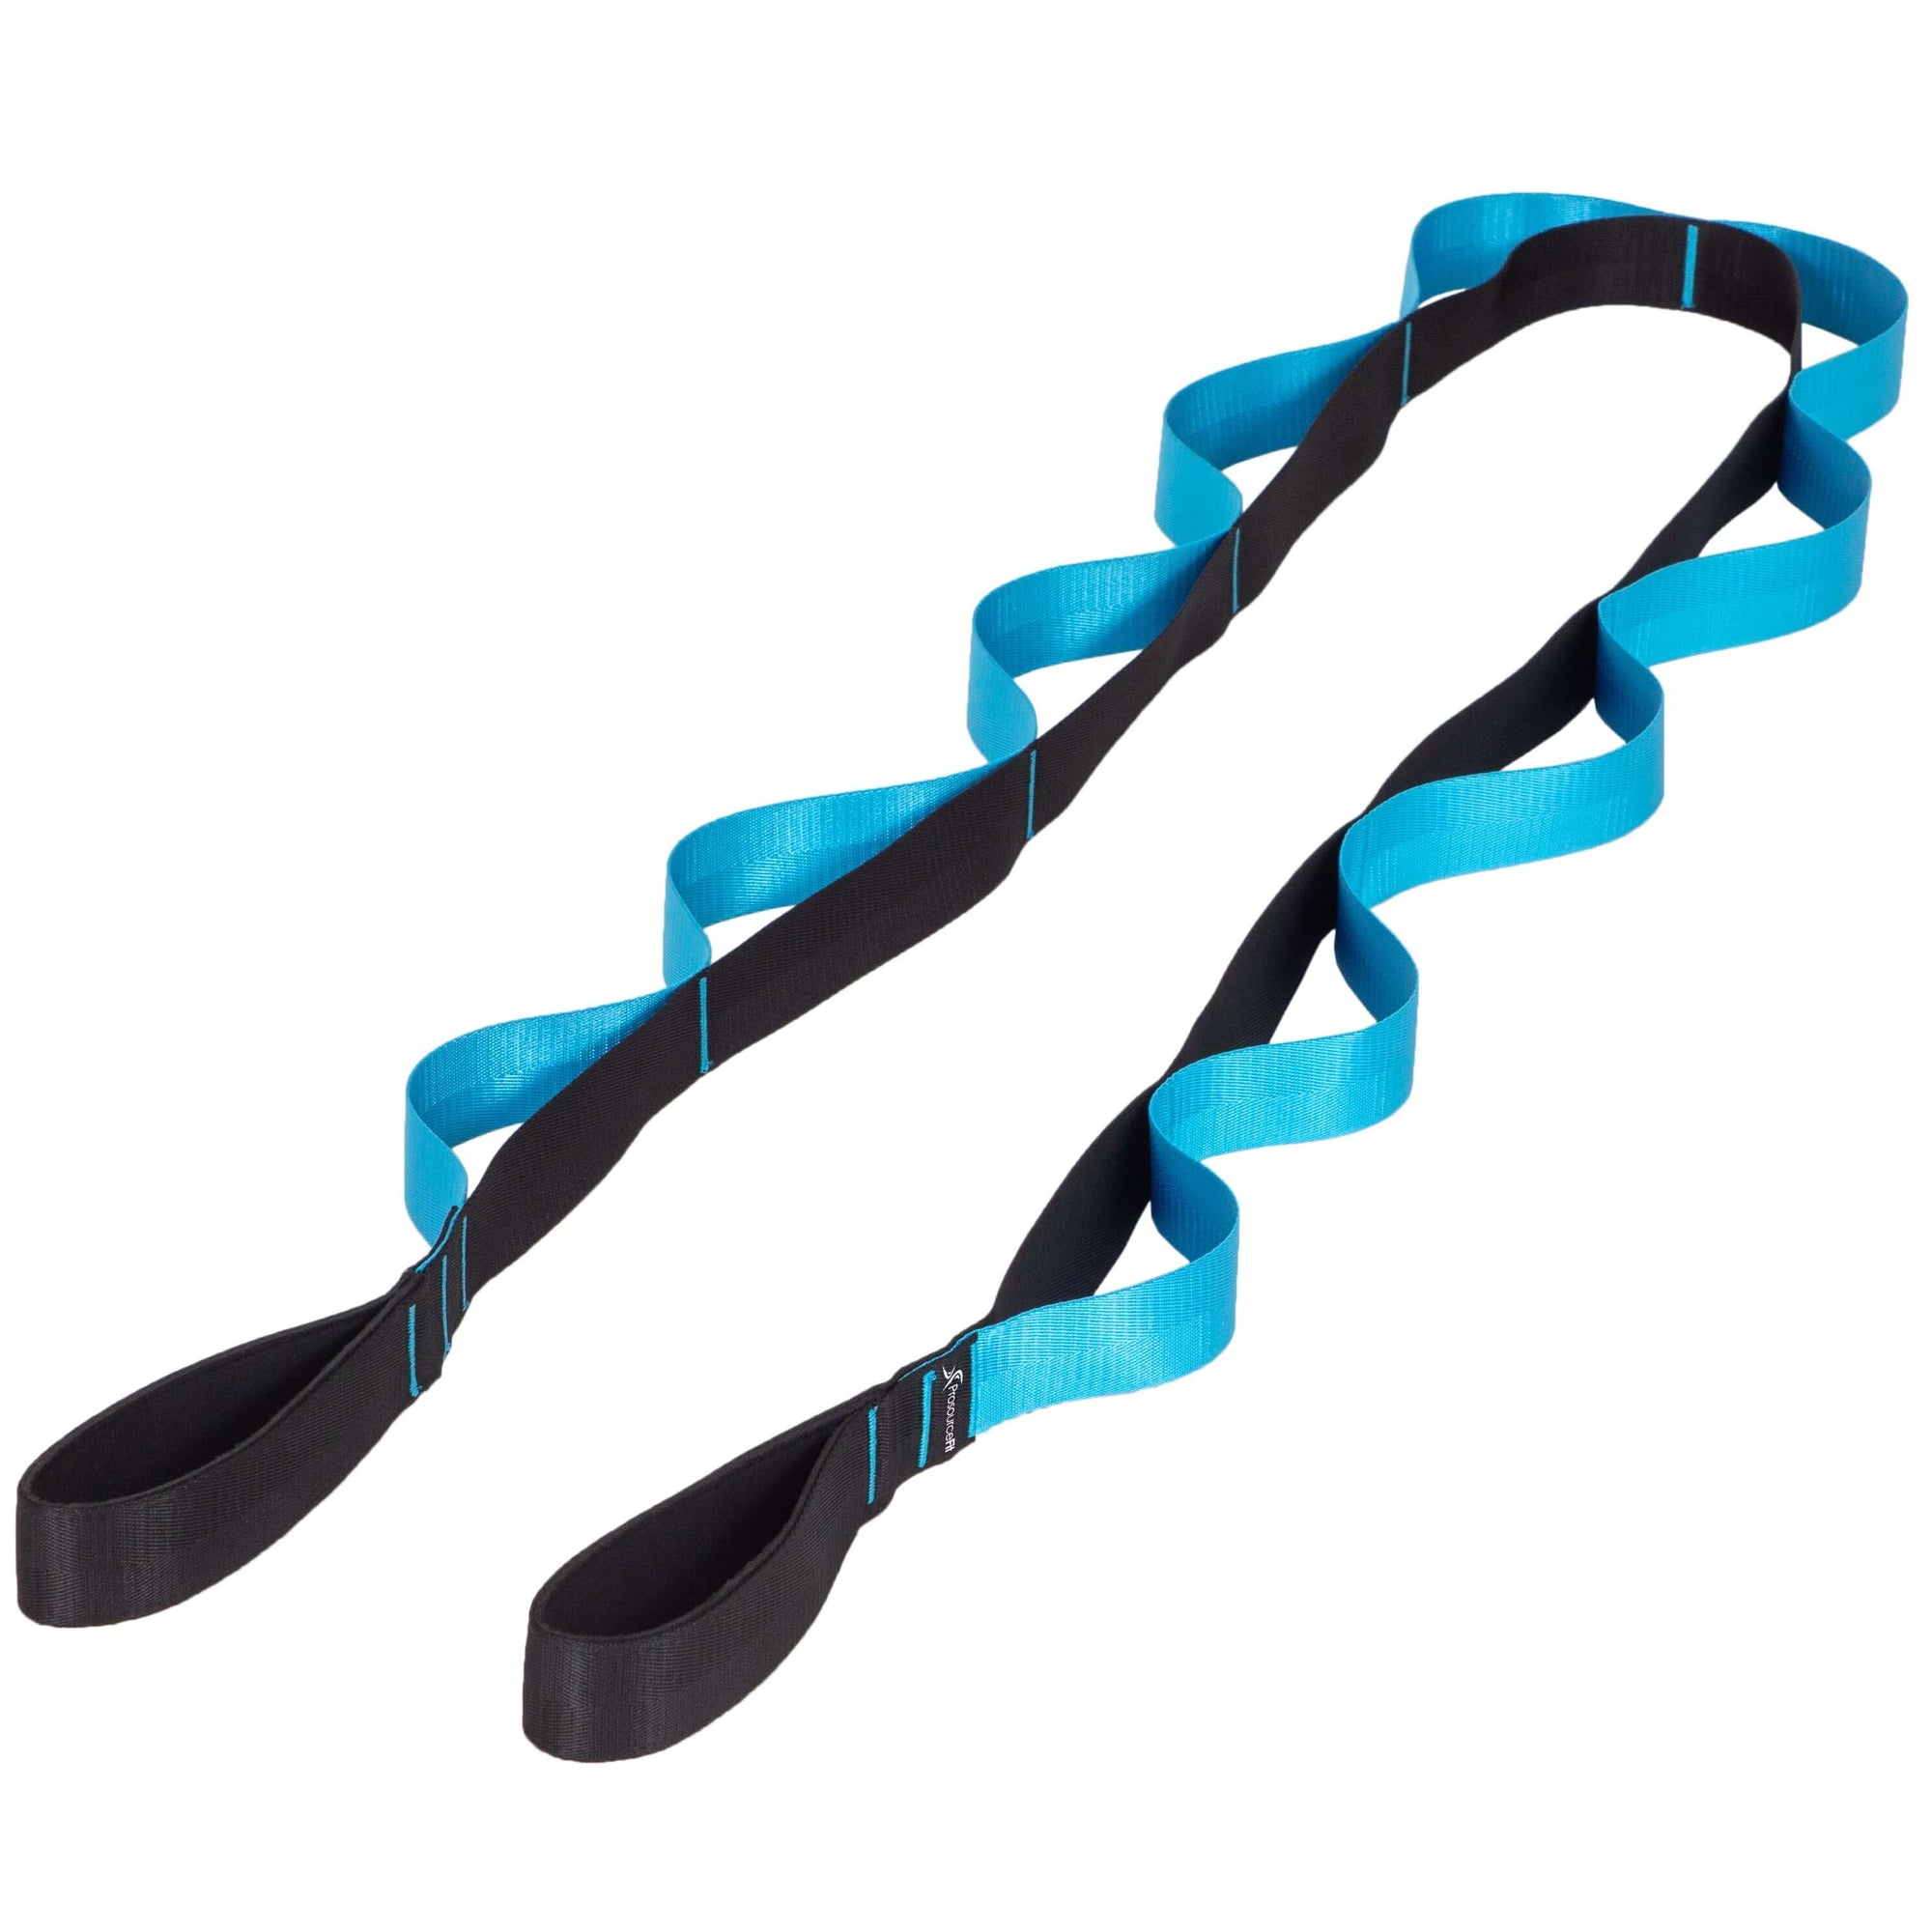 XAGOFIT Yoga Stretch Strap with Multi Loops - Adjustable Exercise Band